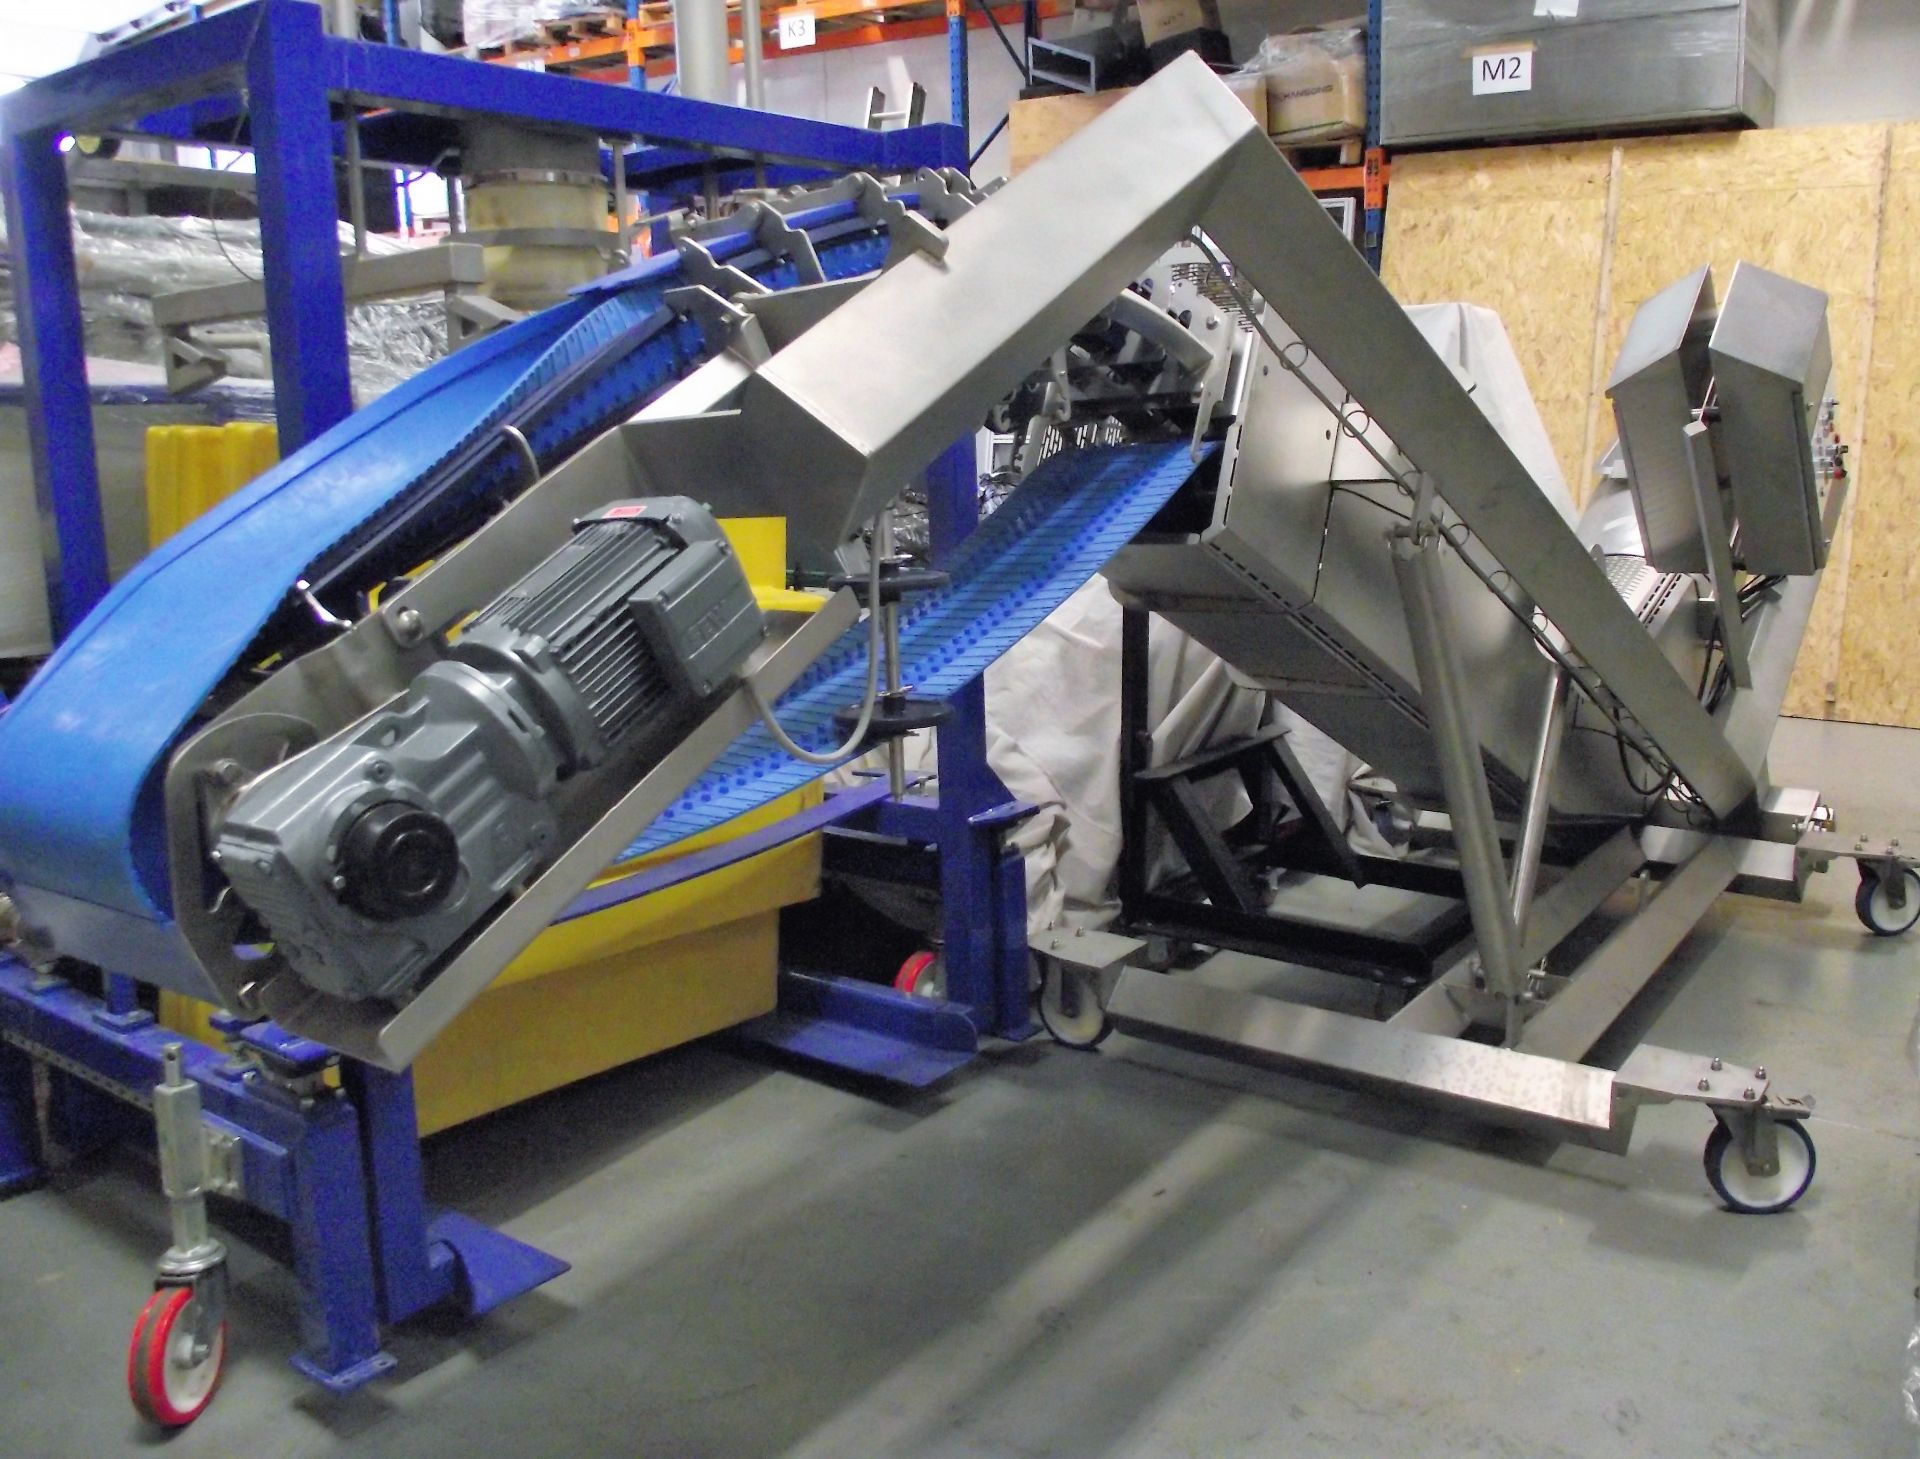 Liftvrac Inclined Conveyor & Bagging System - Image 11 of 40